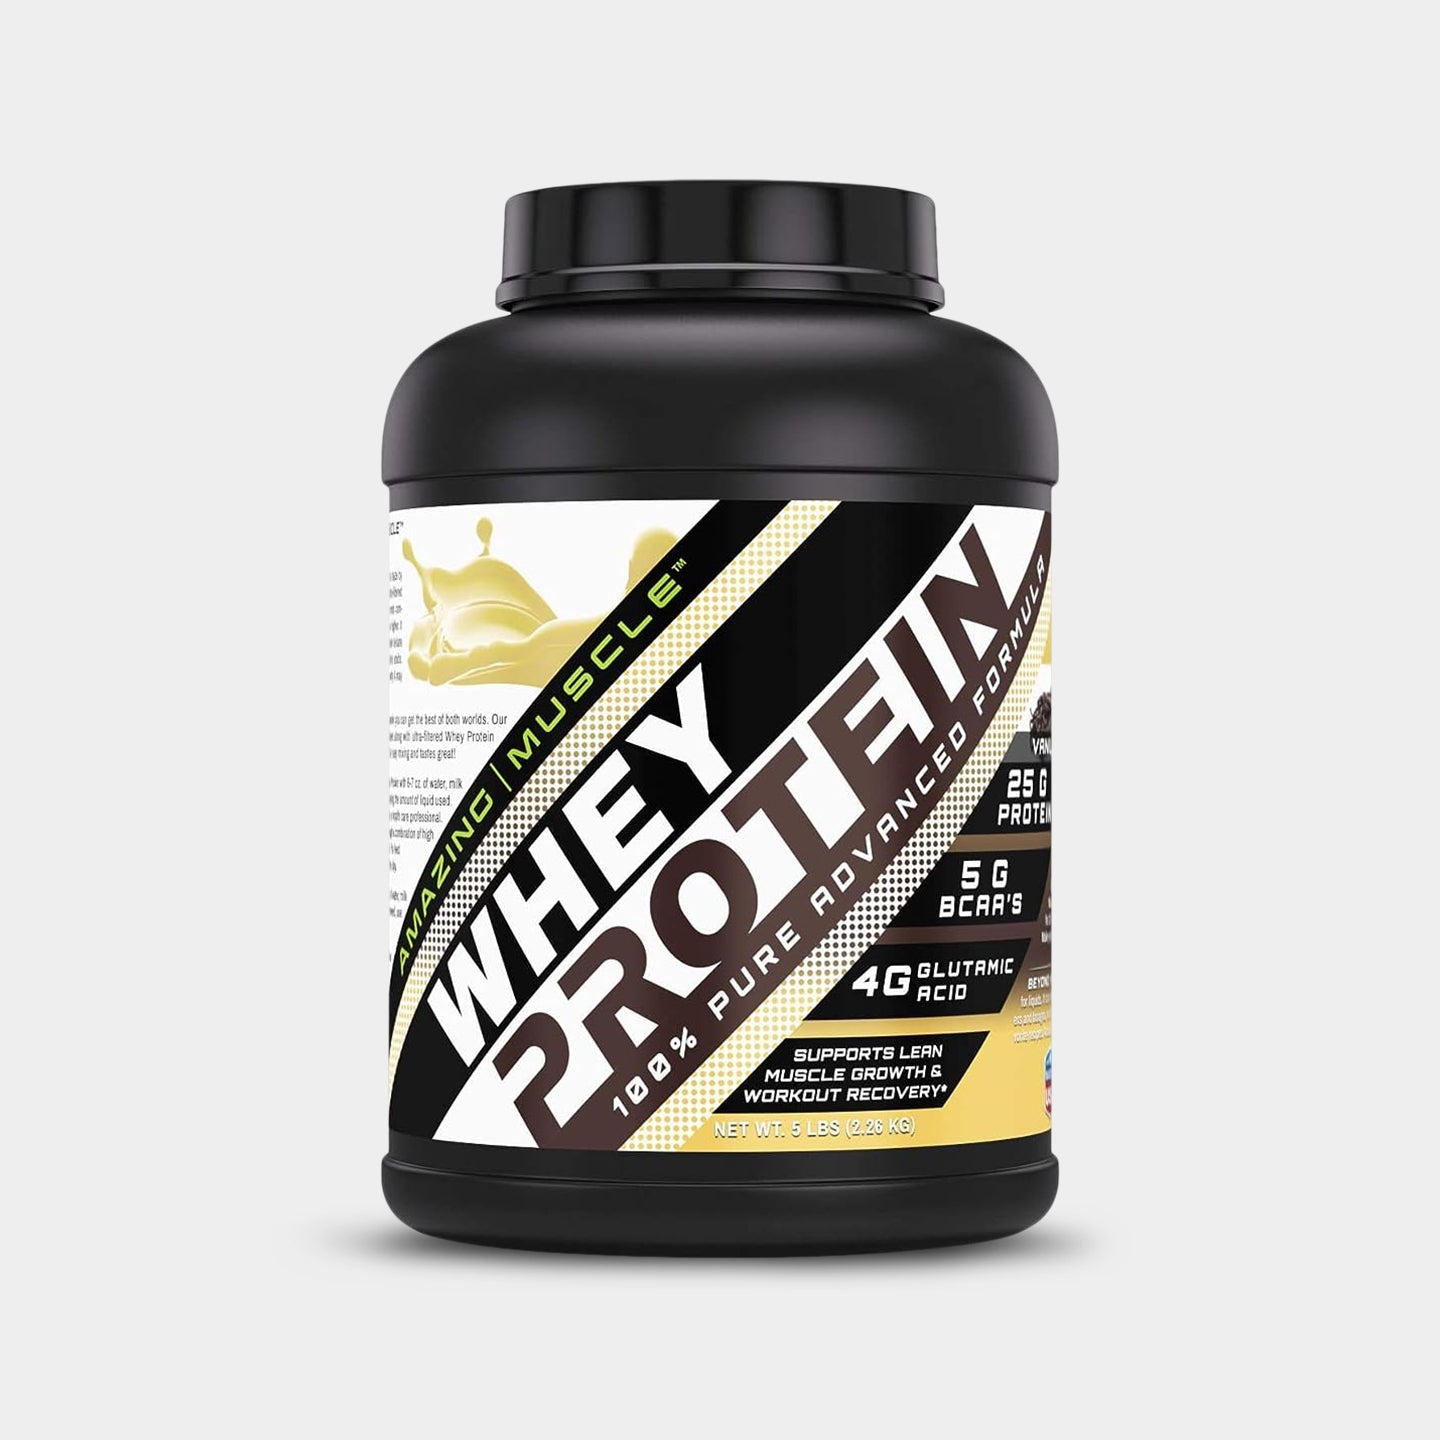 Amazing Muscle Whey Protein, Vanilla, 5 Lbs A1